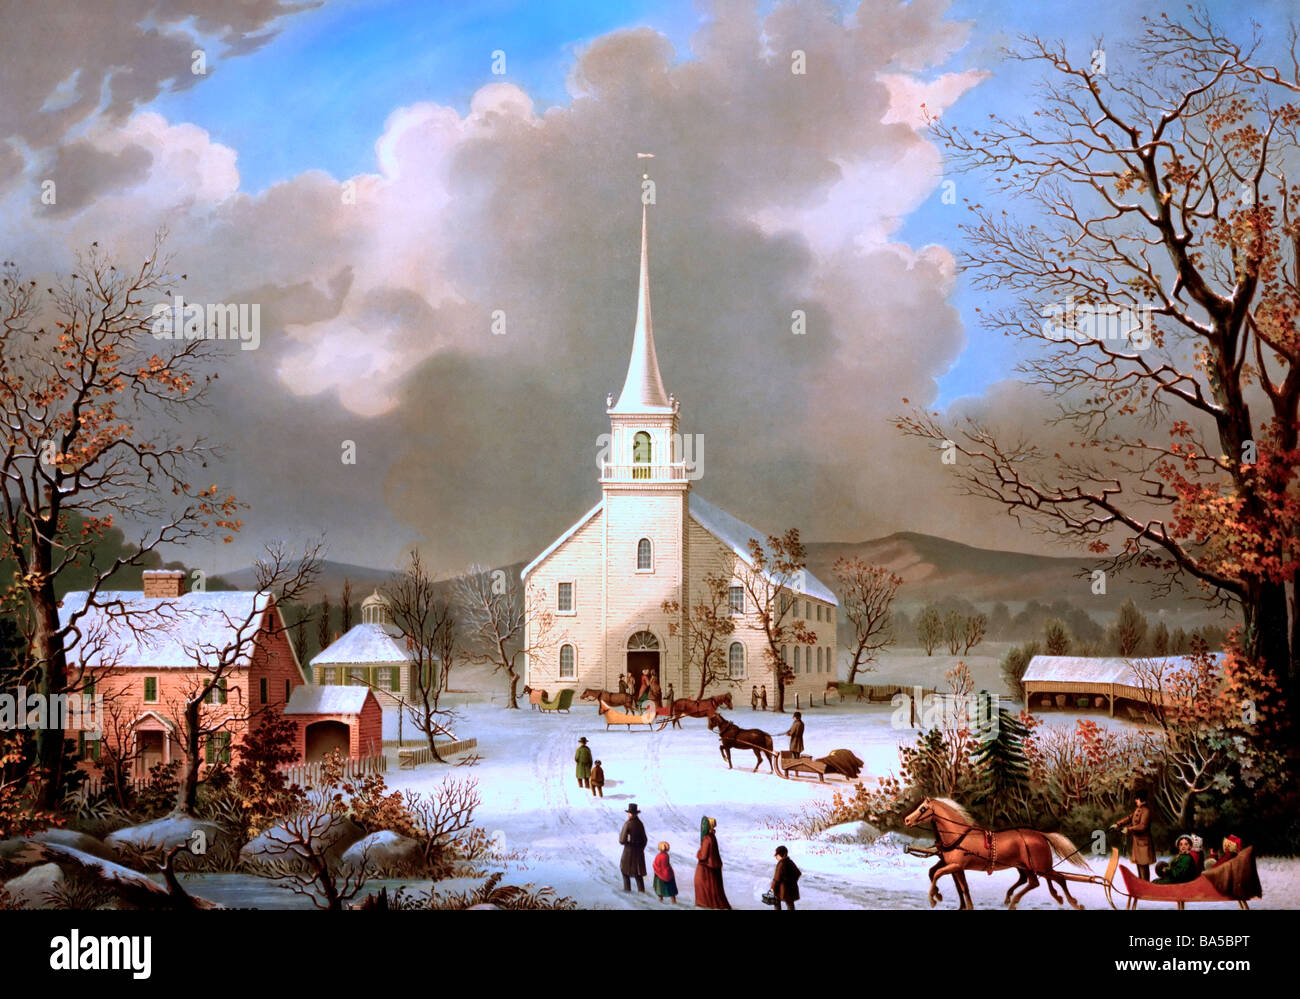 Winter Sunday in olden times Stock Photo